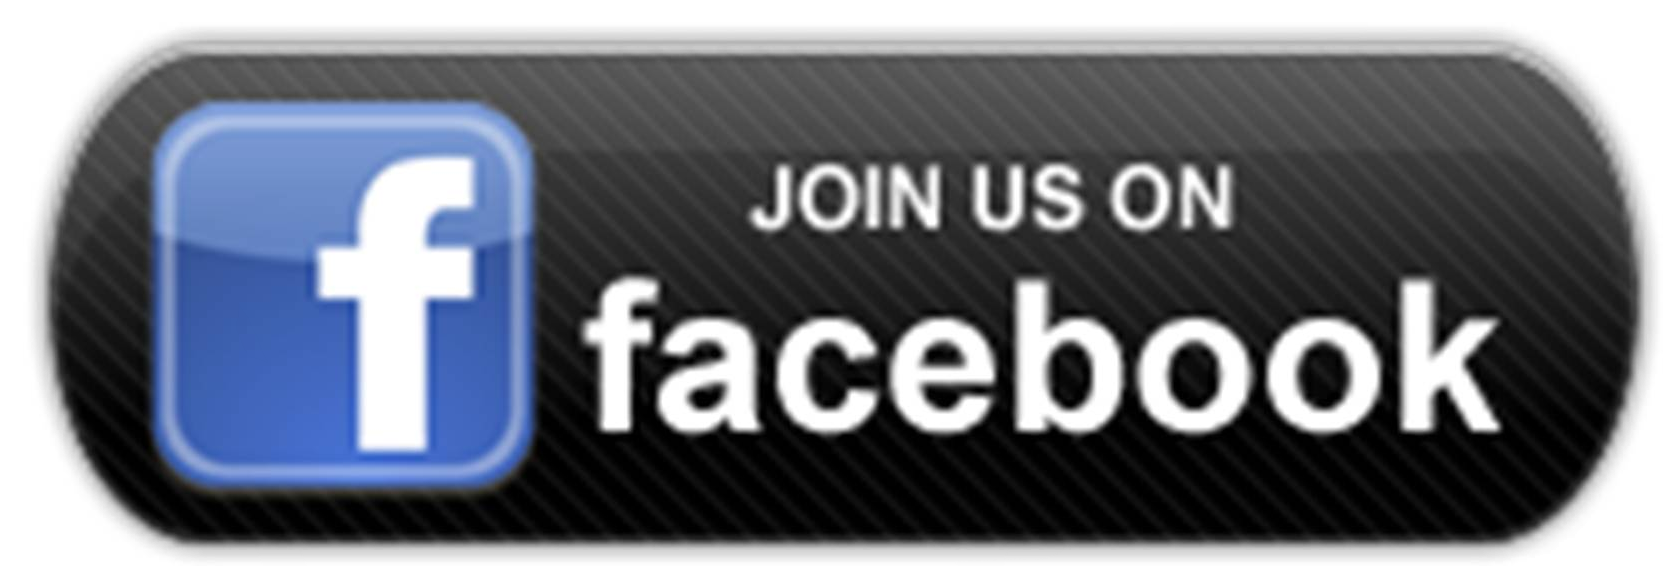 Join us on Facebook image